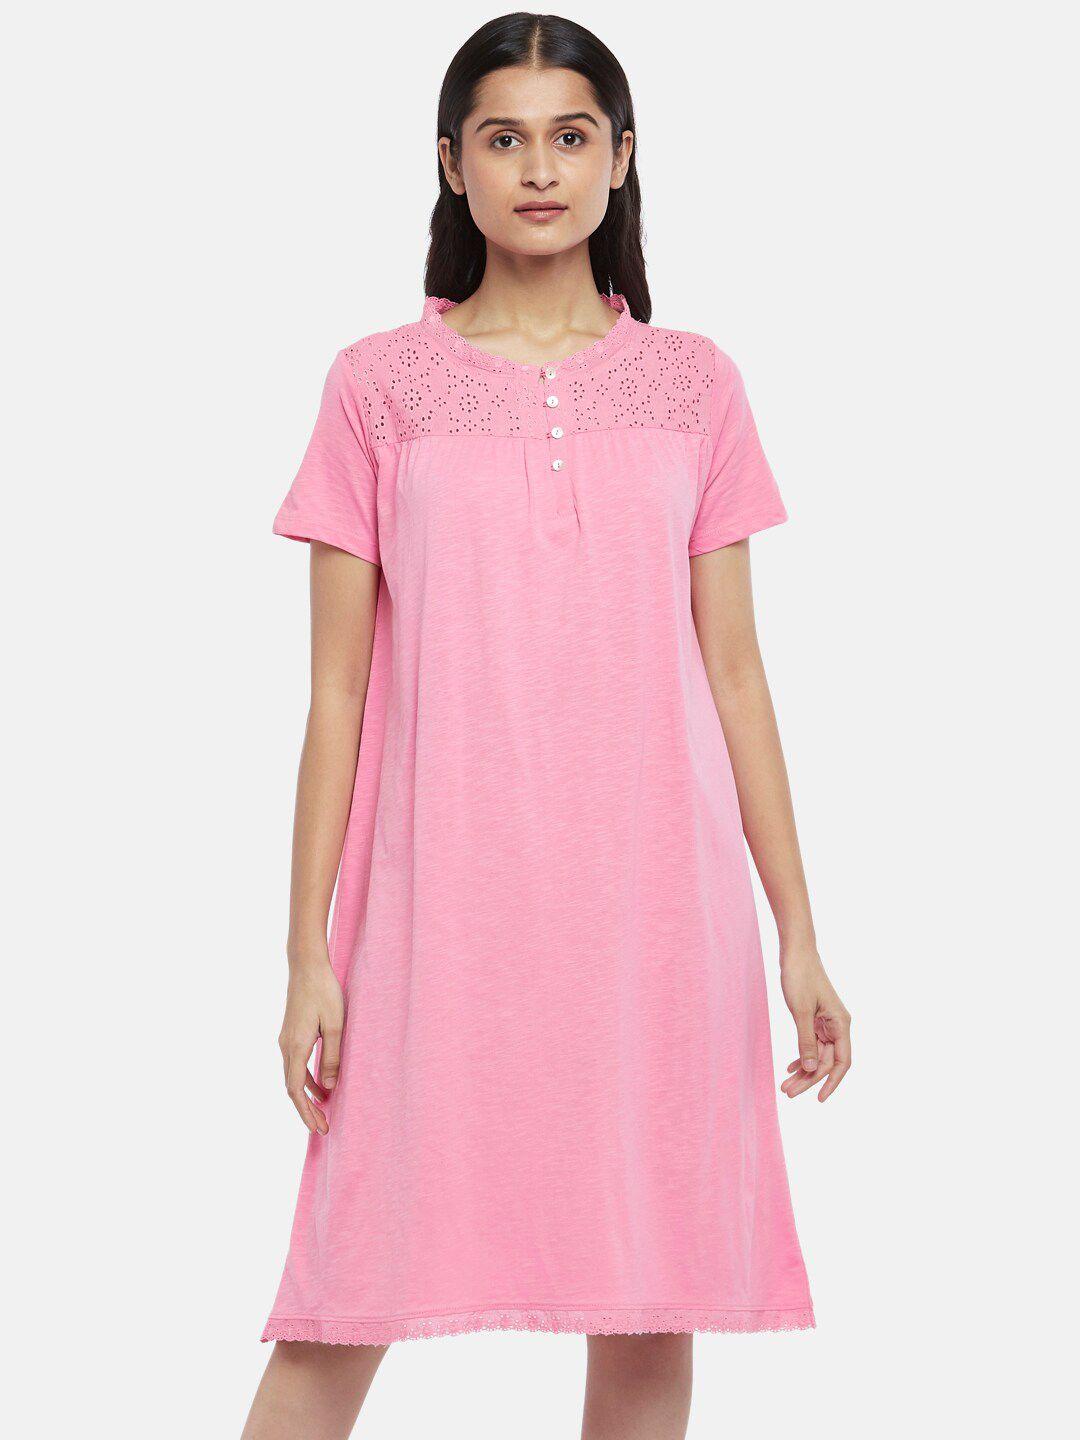 dreamz by pantaloons pink solid cotton nightdress